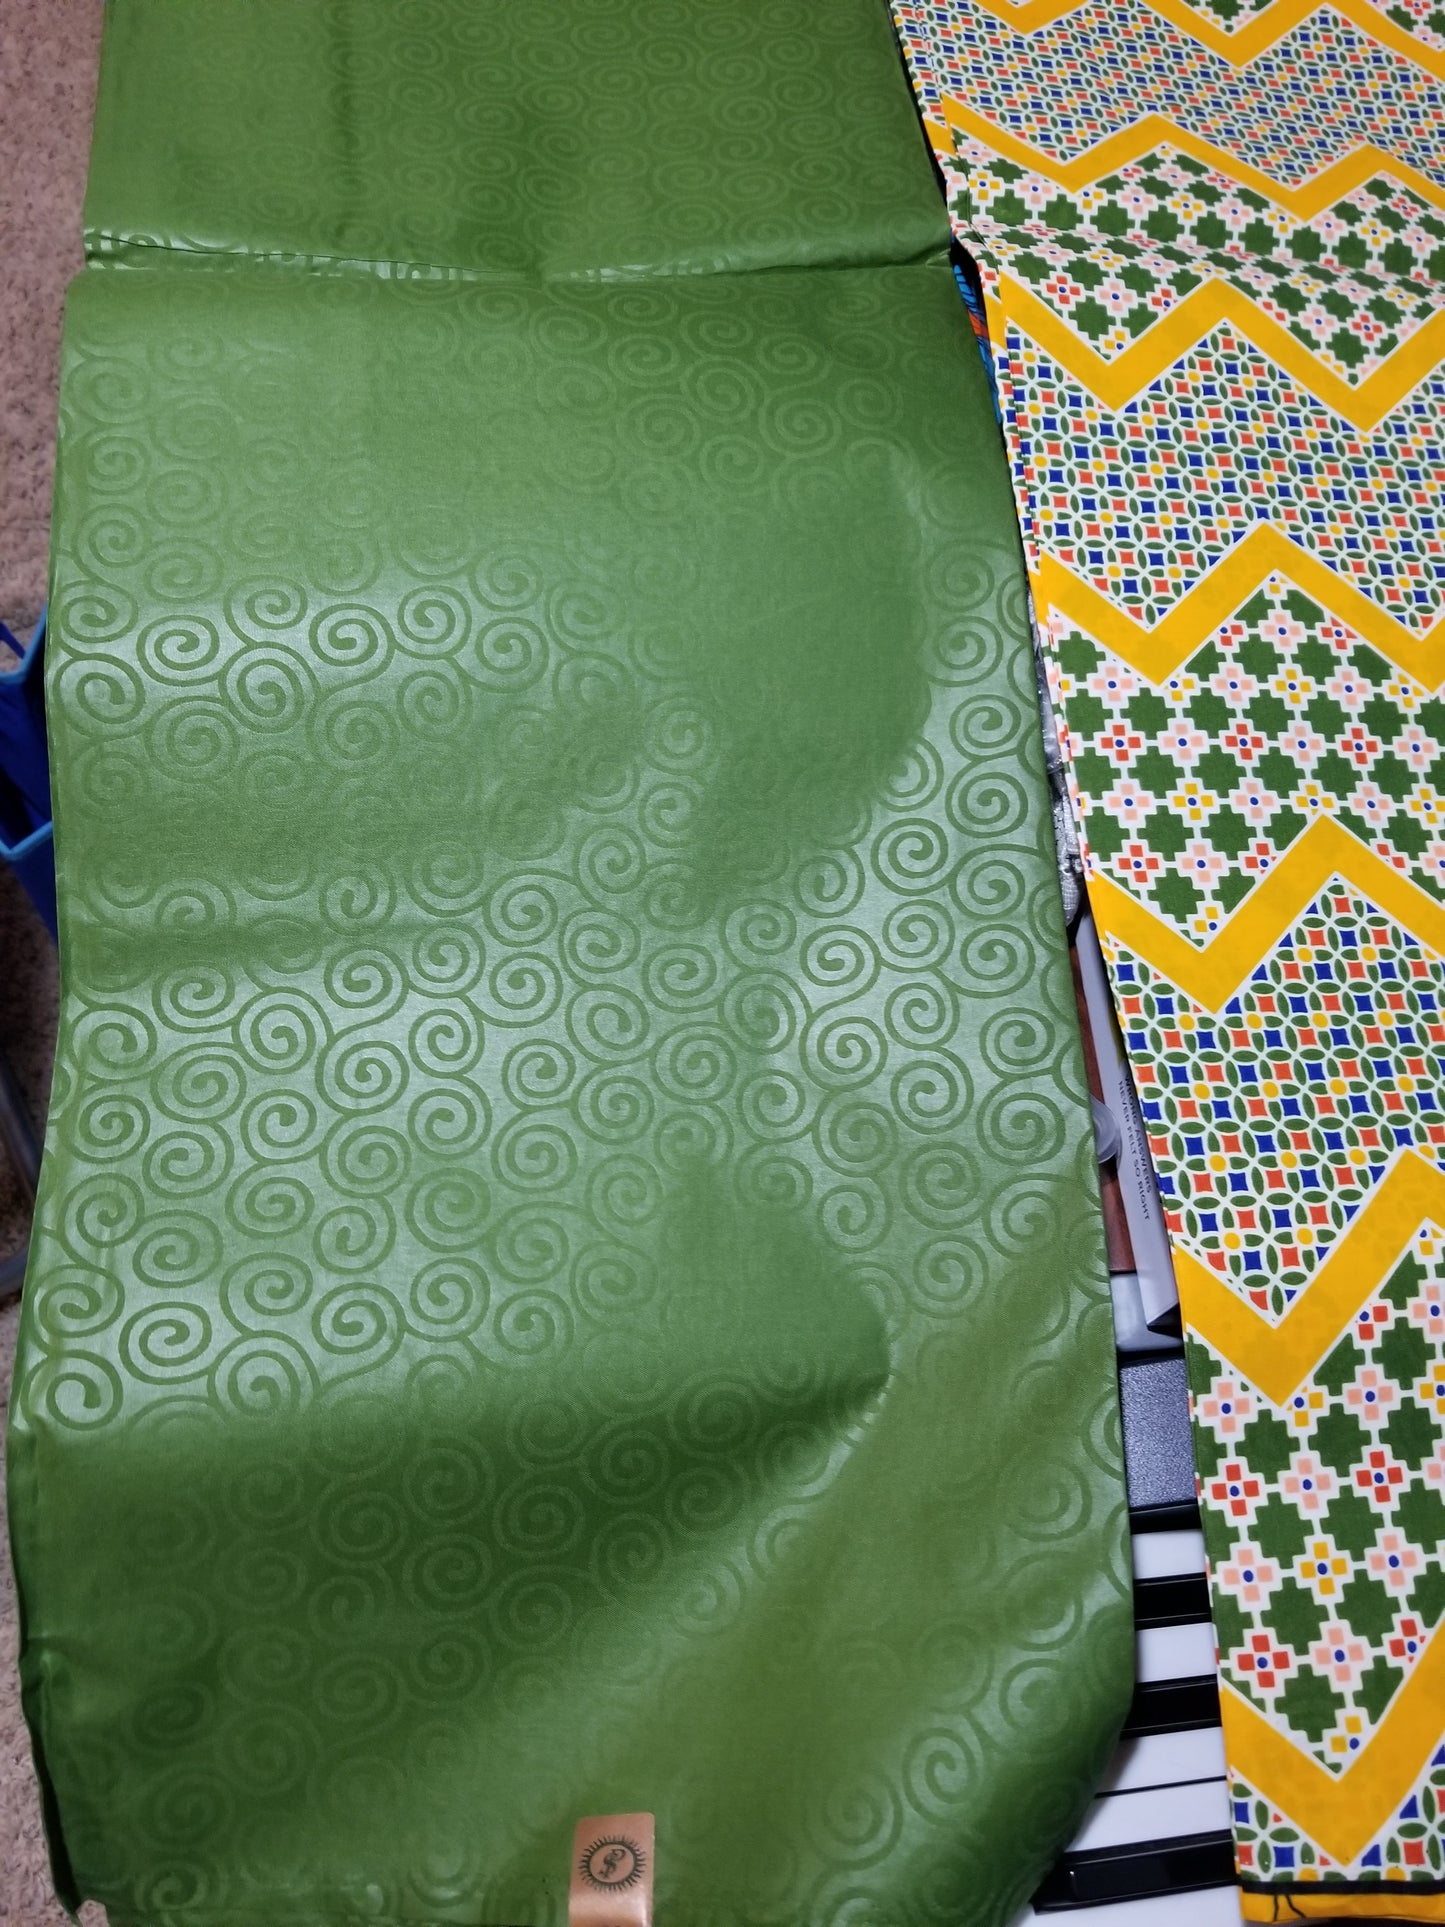 New arrival 4yds flower Ankara + 2yds plain combinations. Latest African  wax print fabric. Green color mix poly cotton. AFRICAN wax print sold per 6yds. Price is for 6yds.